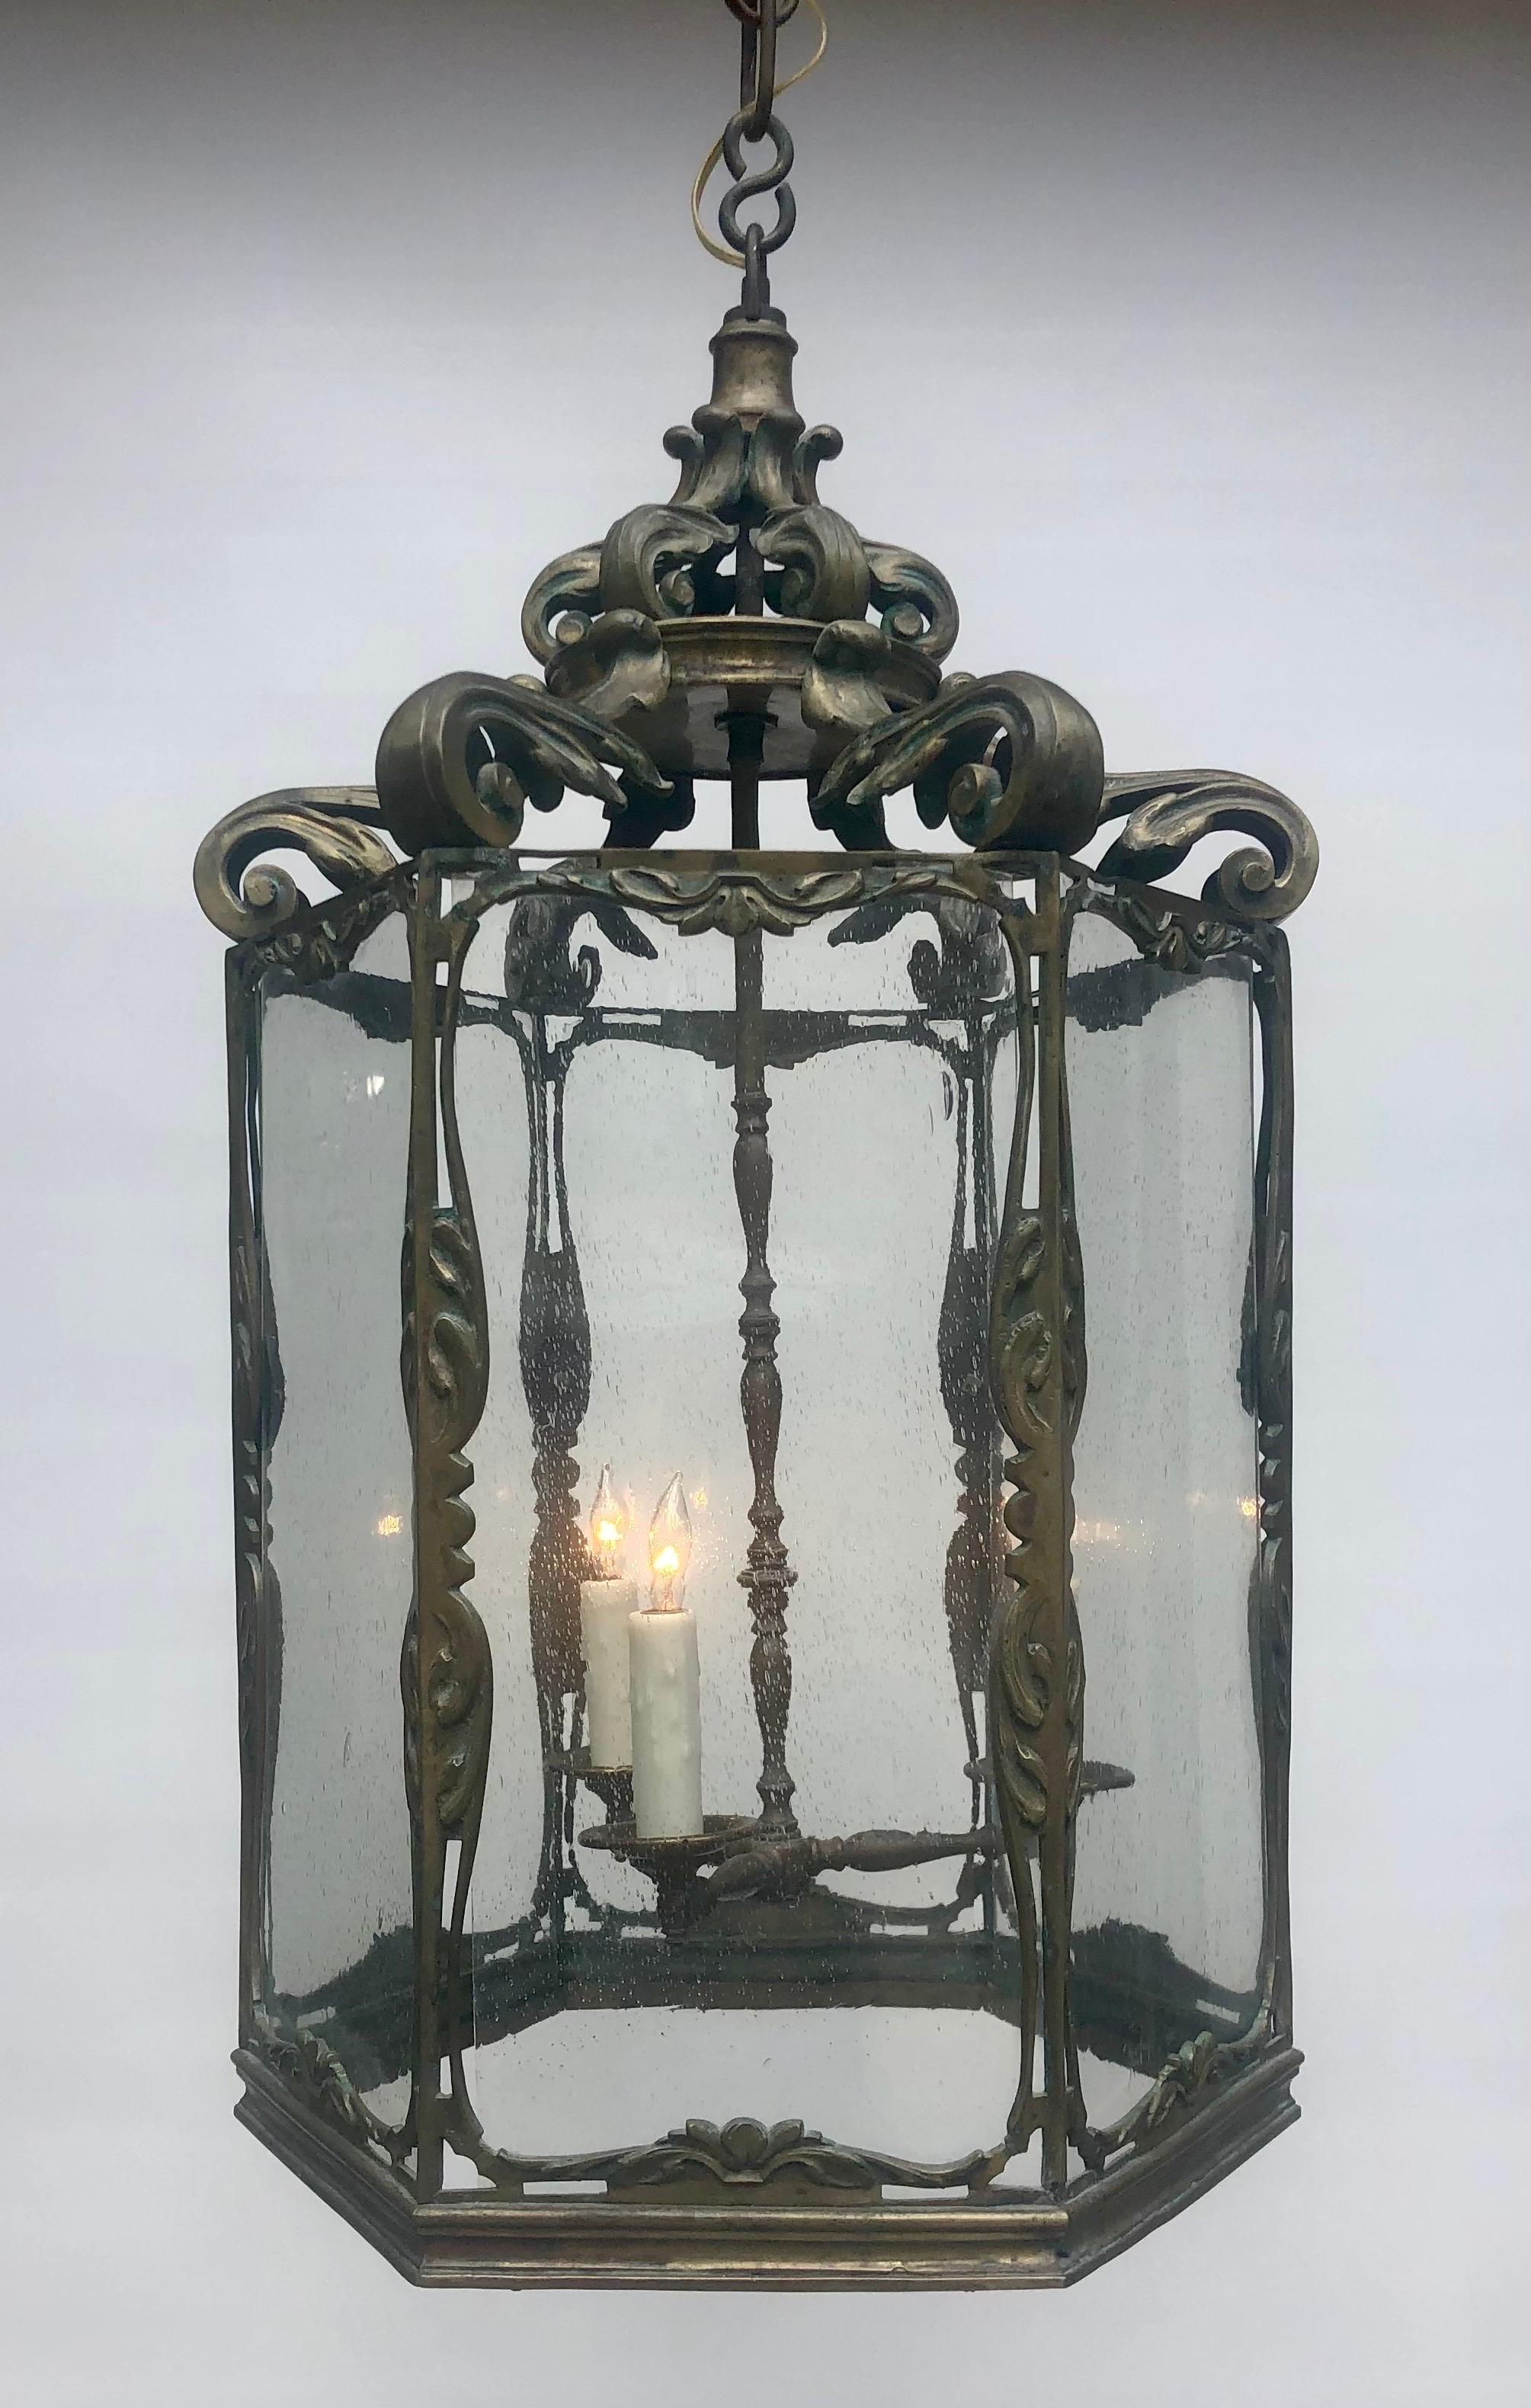 This Sophisticated English Regency Bronze Chinoiserie Hexagon Lantern with a three light cluster was made in the early 19th century. The Chinoiserie Bronze Lantern has six seed glass pane quadrants separated with bronze columns adorned with